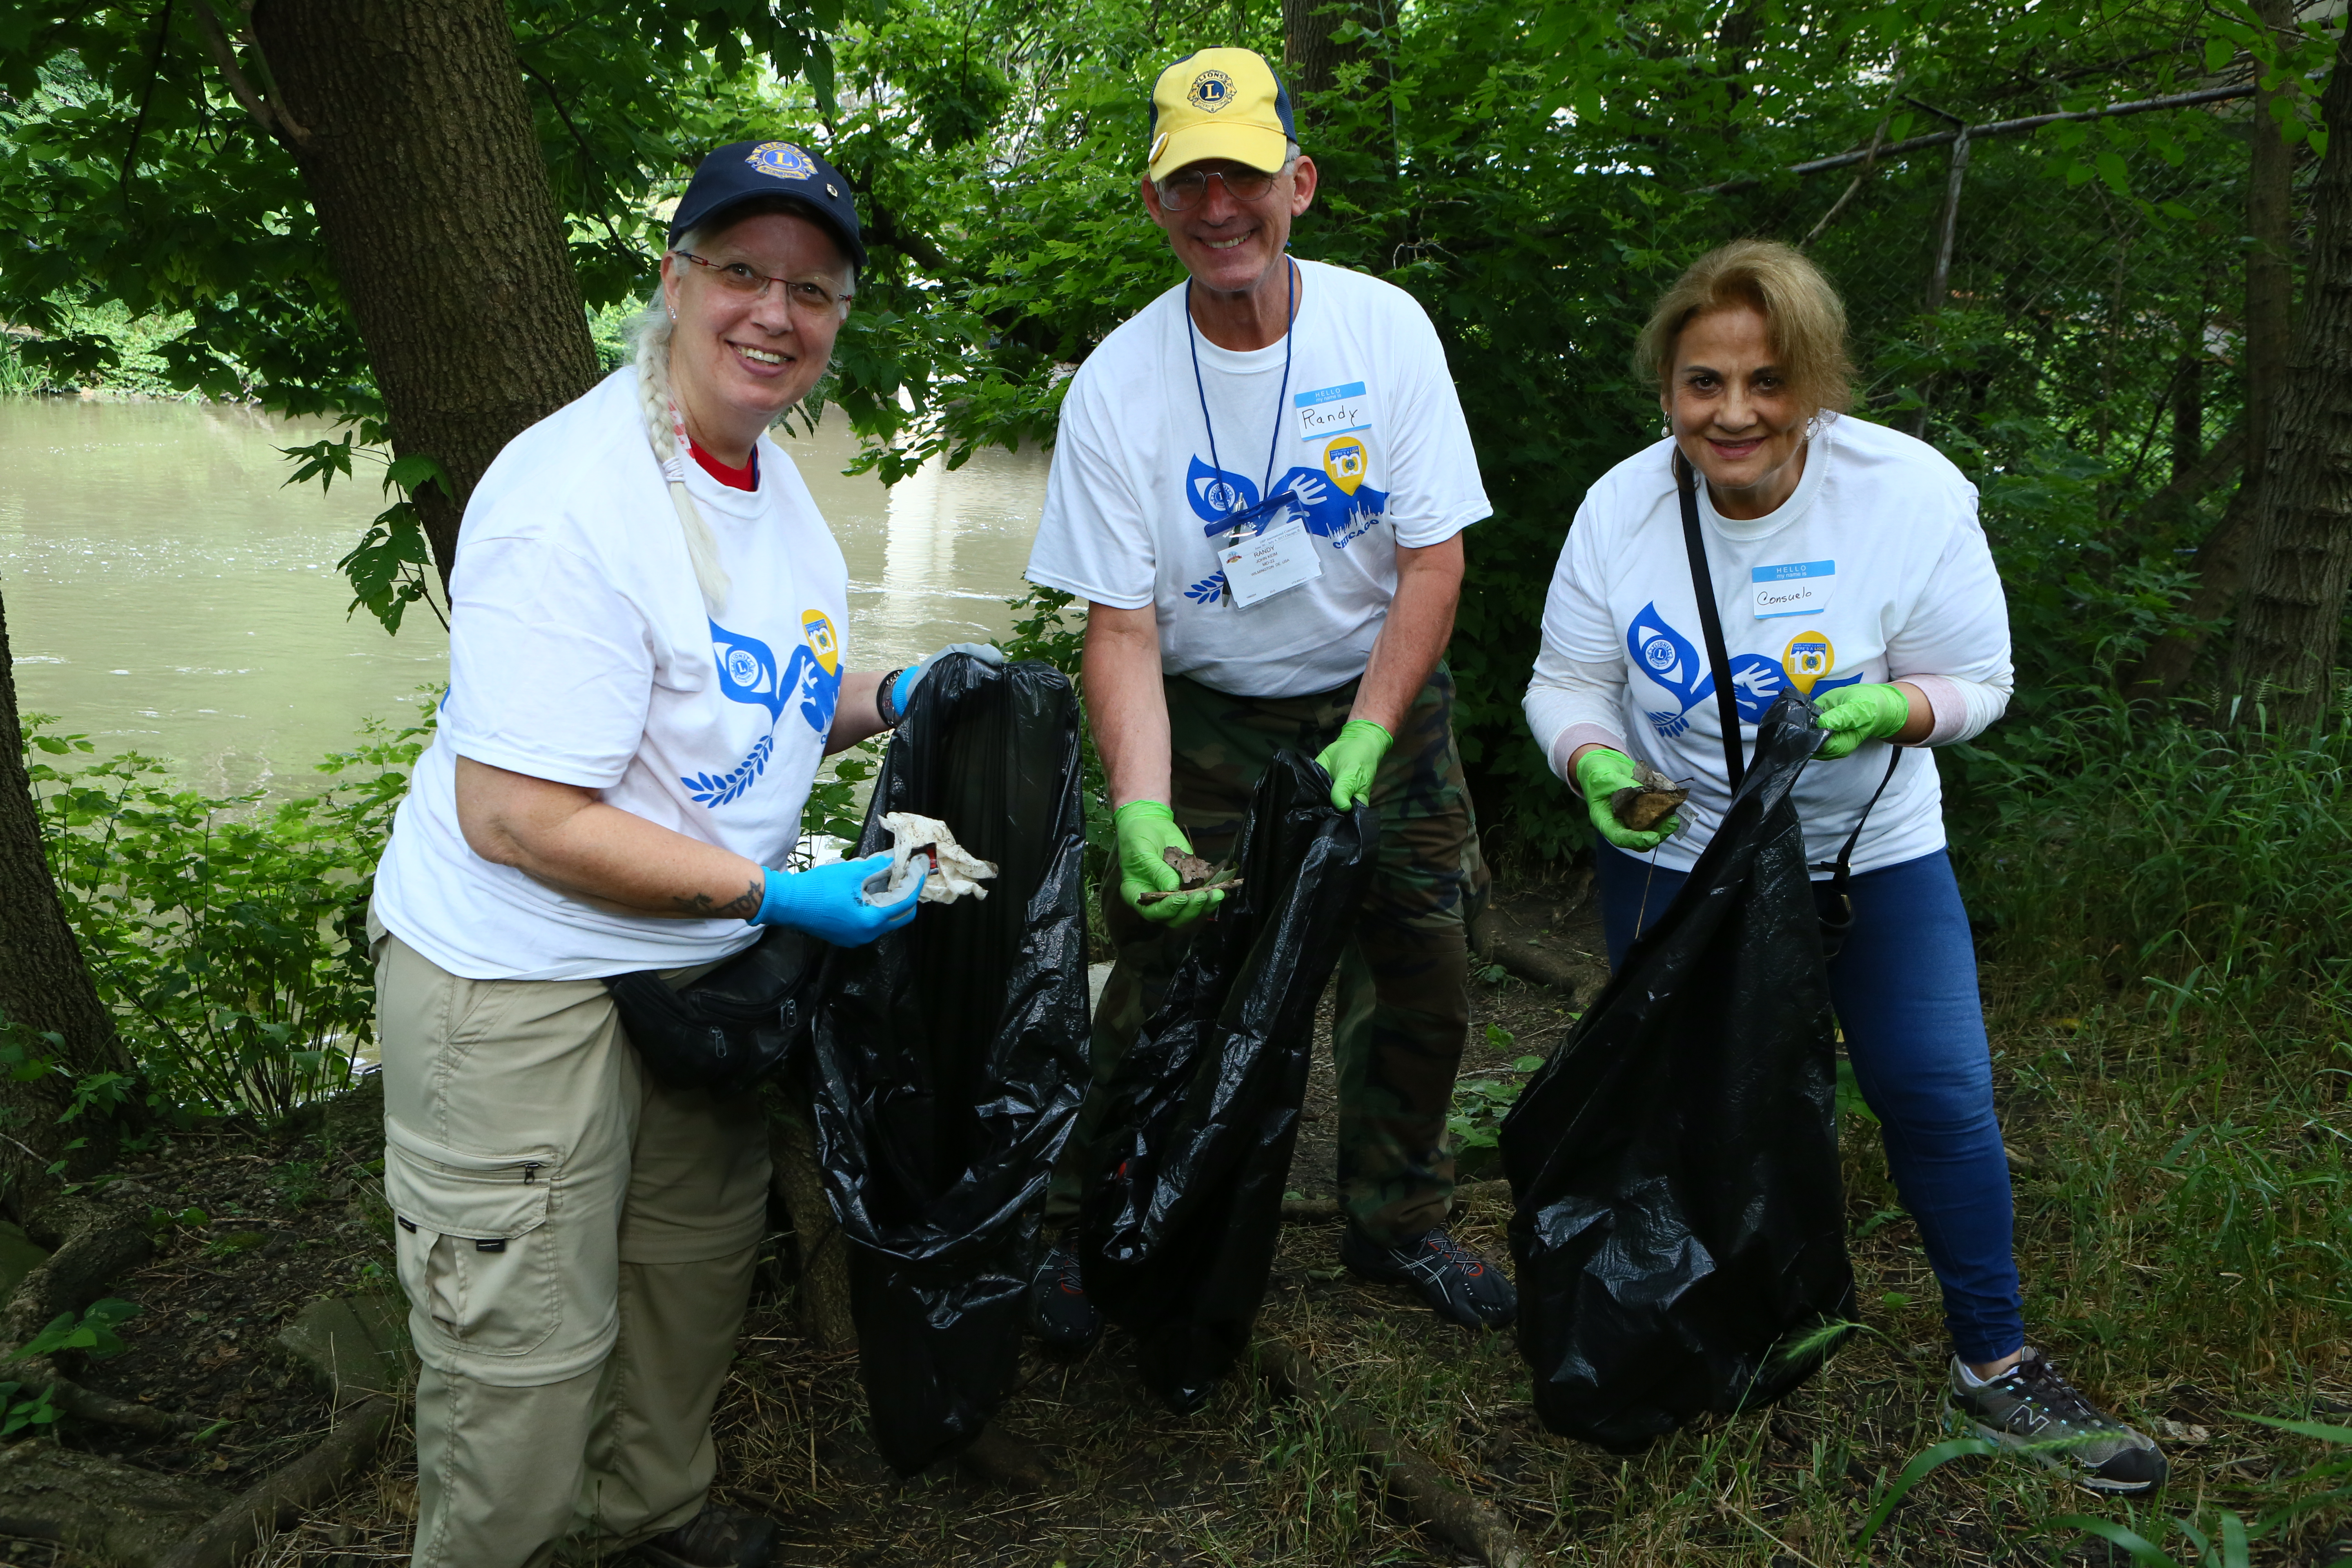 Lions clean up the Chicago River during the 100th Lions International Convention.